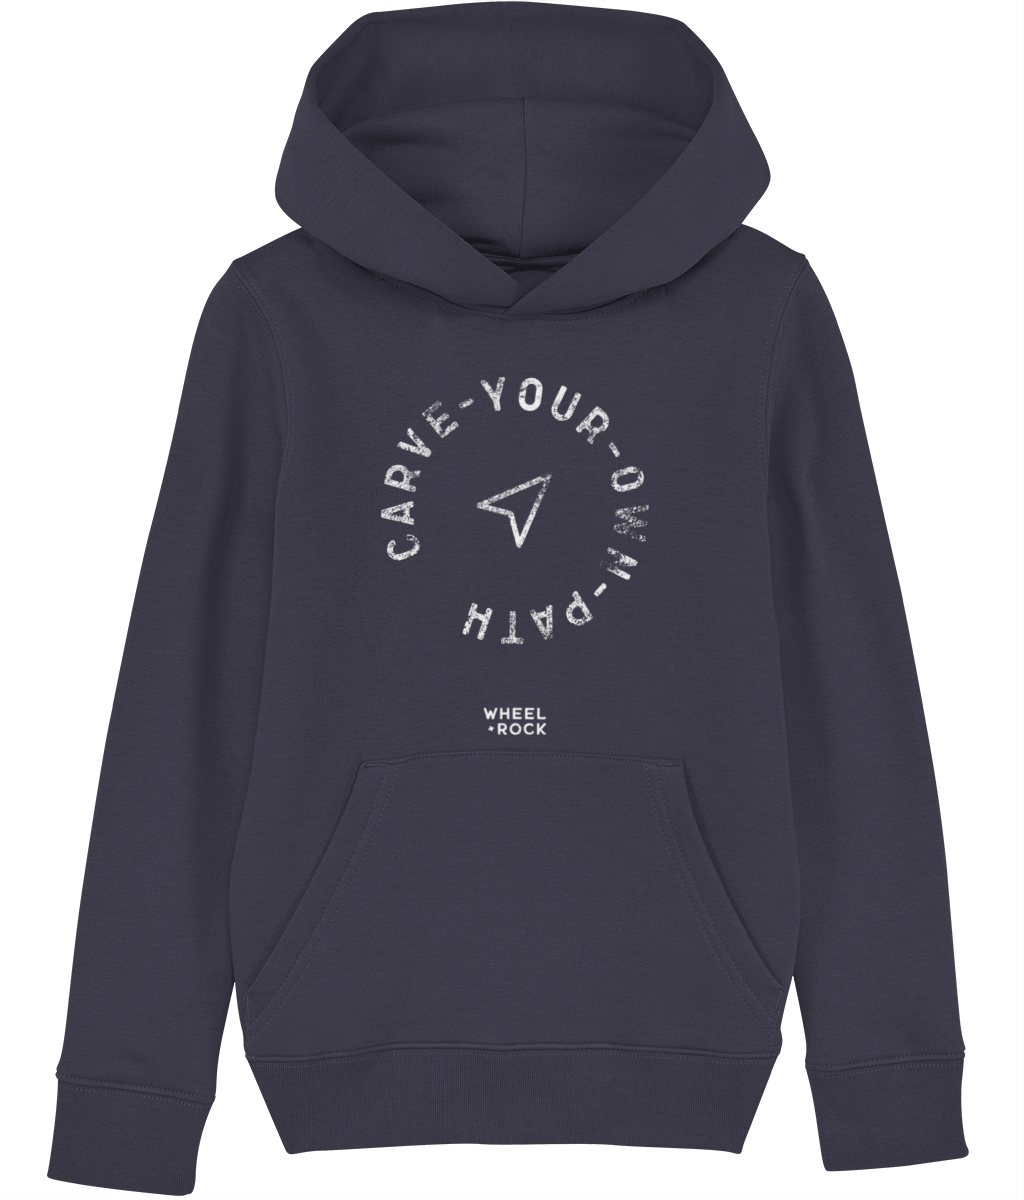 Carve Your Own Path - Kids Hoodie - BLUES